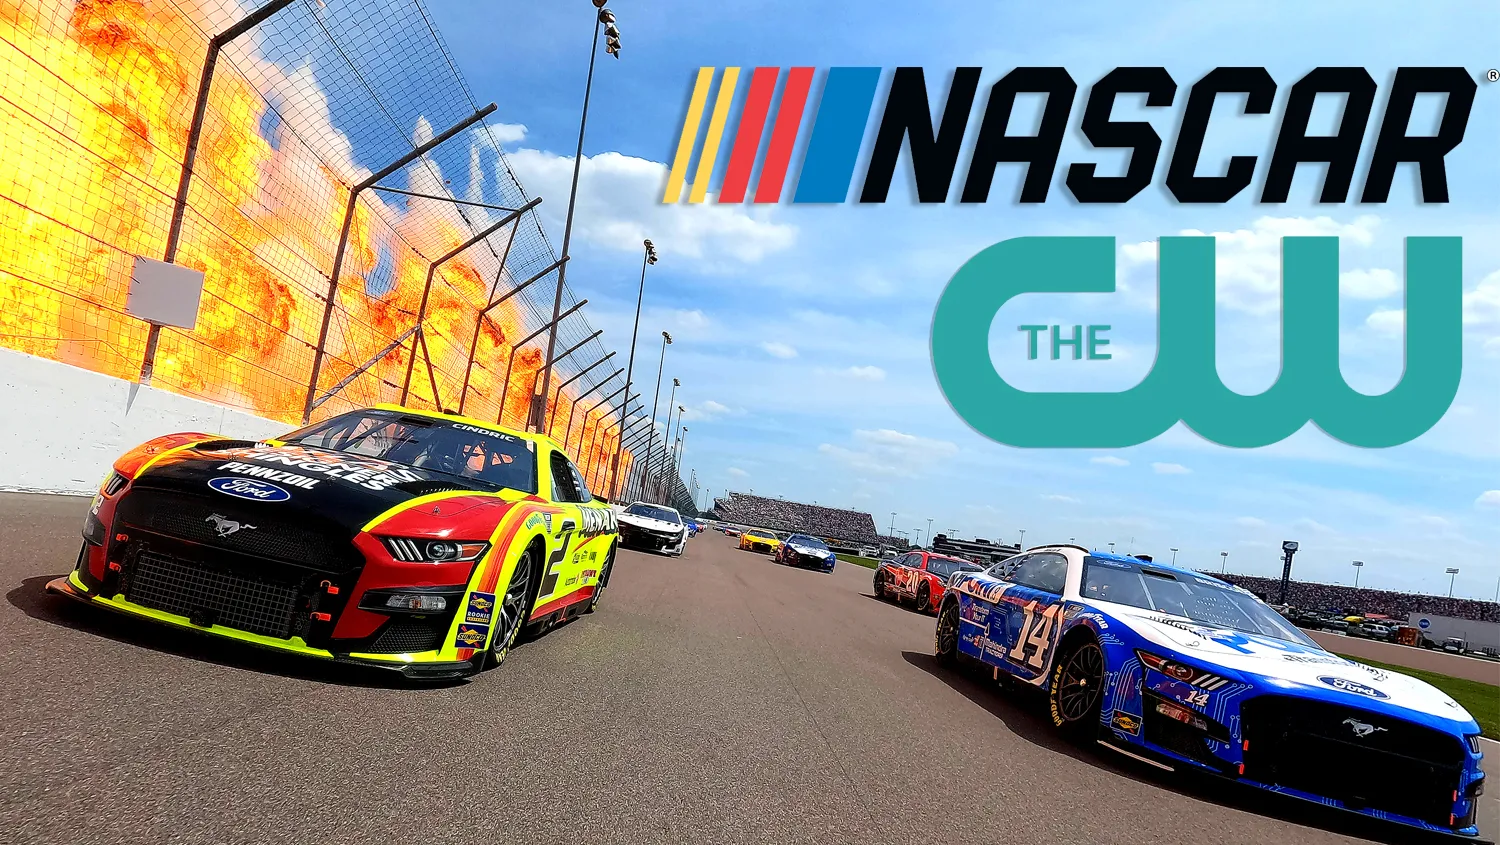 NASCAR Races to Air on CW Network Ahead of Schedule